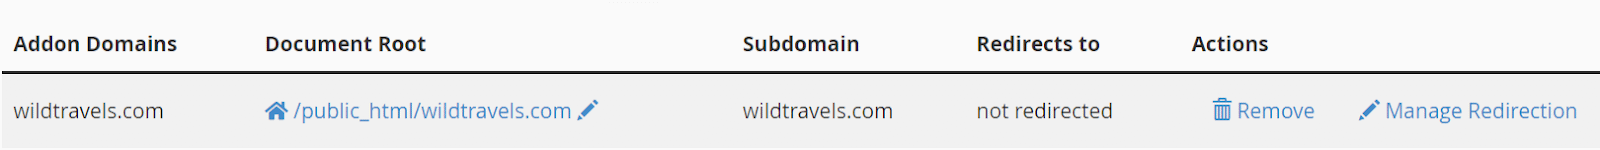 addon domains section